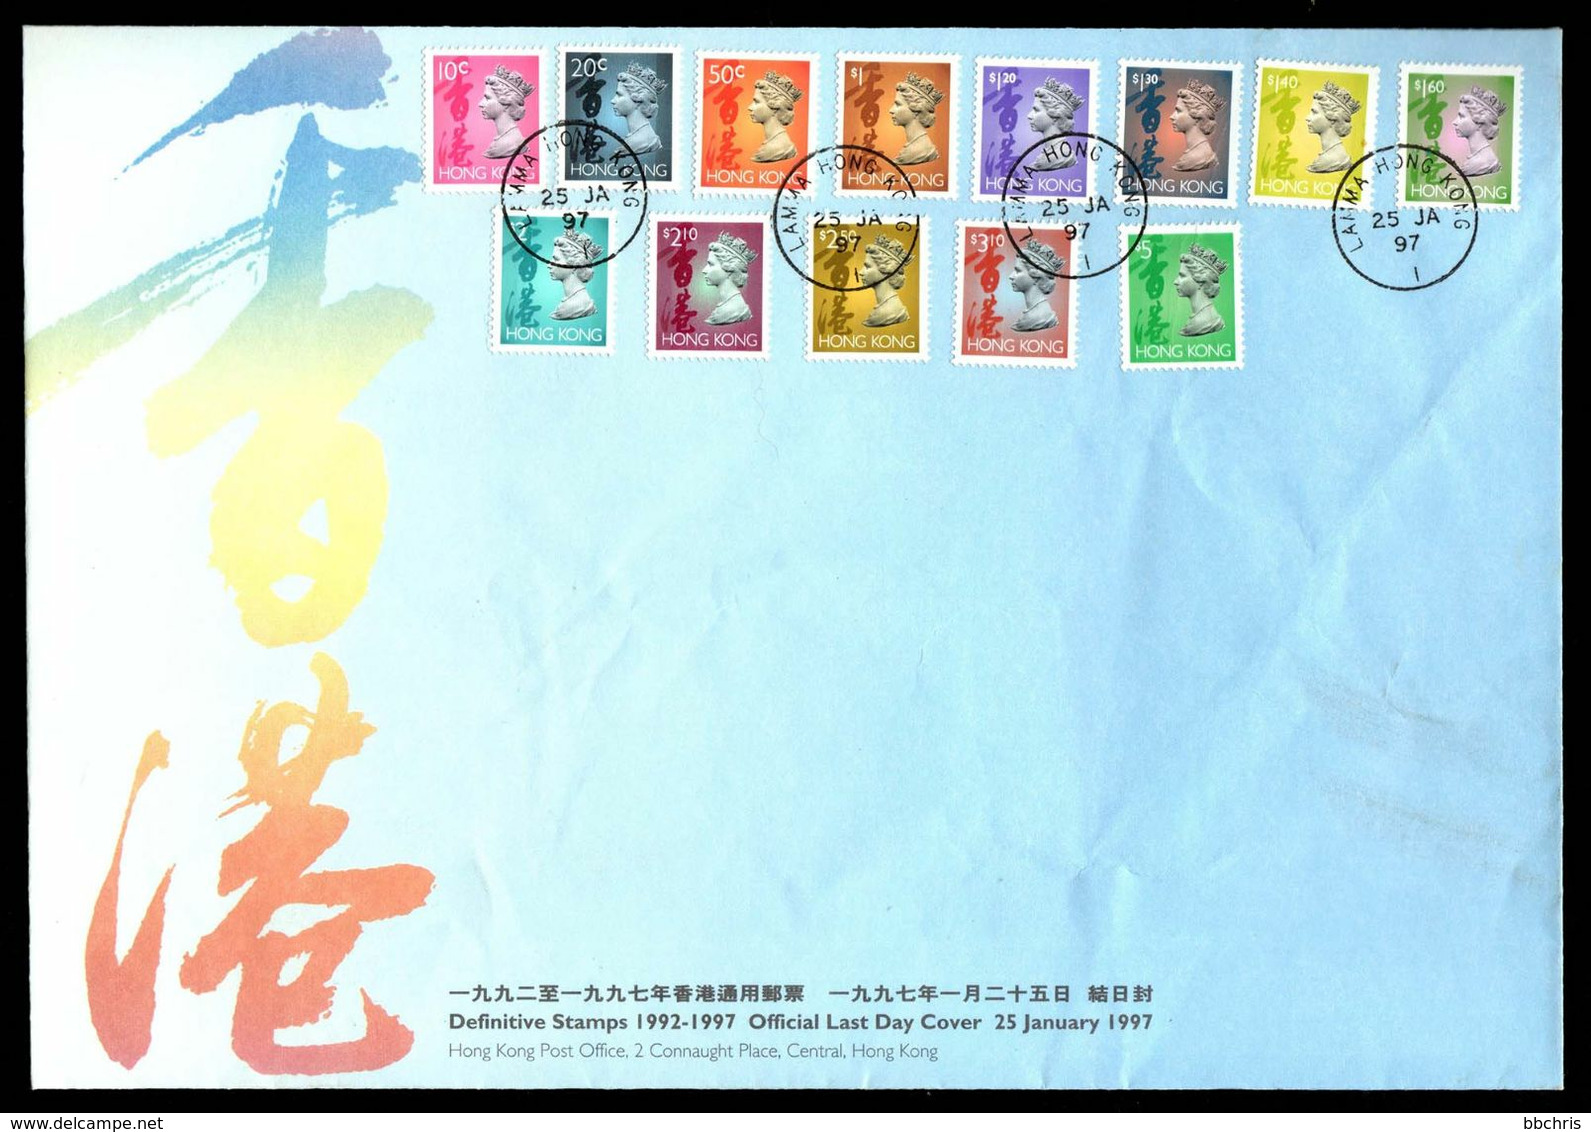 Last Day Cover 1997 Hong Kong Definitive Stamps 1992 - 1997 Lamma Postmark - FDC